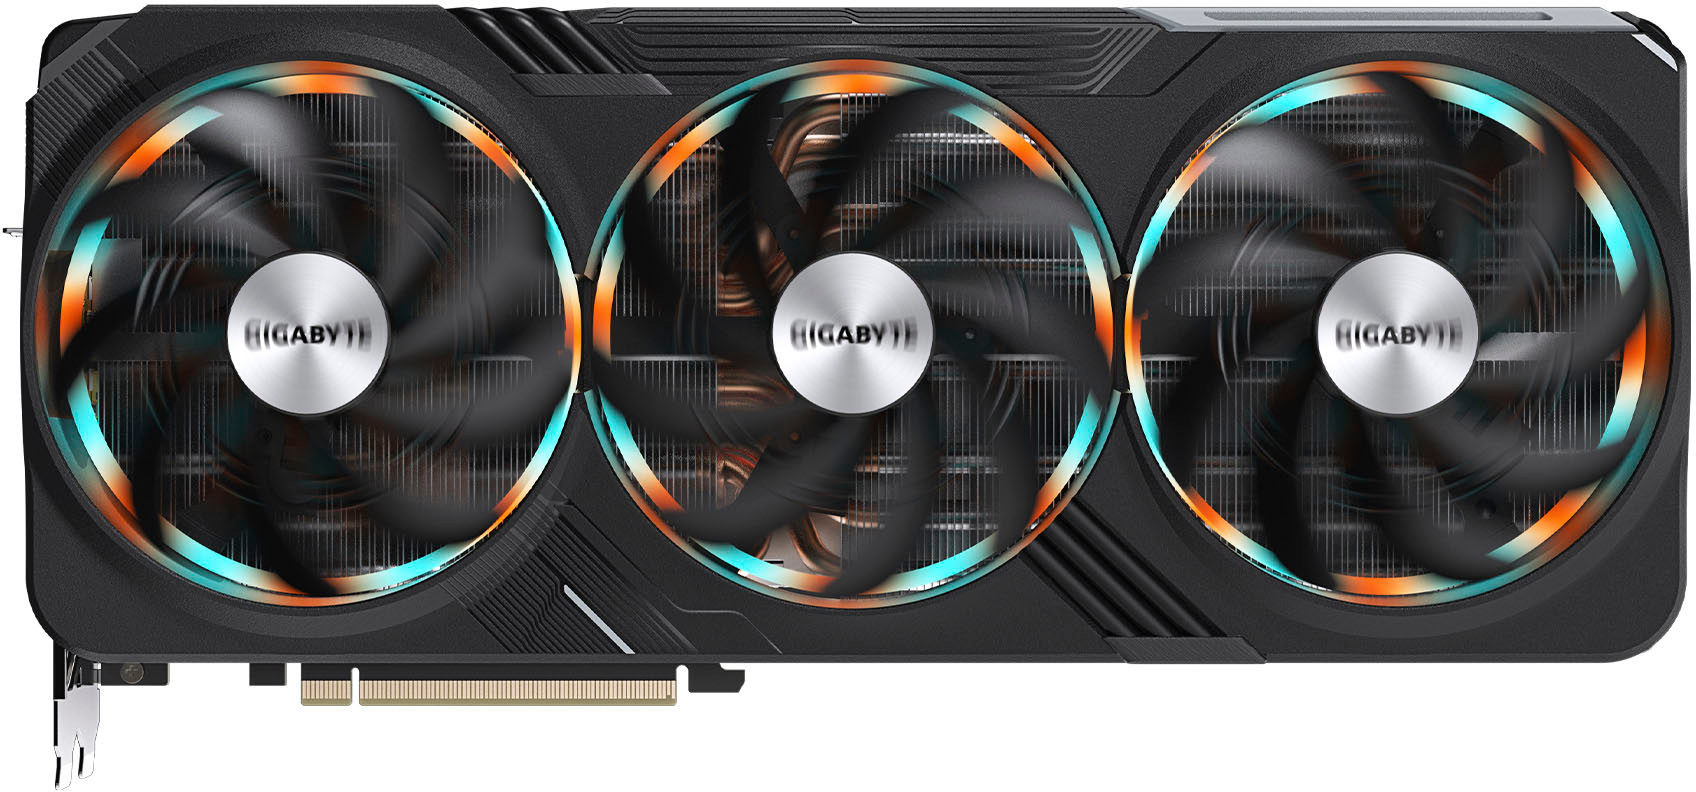 GIGABYTE AORUS GeForce RTX 4090 Xtreme WATERFORCE 24G Graphics Card,  WATERFORCE All-in-one Cooling System, 24GB 384-bit GDDR6X, GV-N4090AORUSX  W-24GD